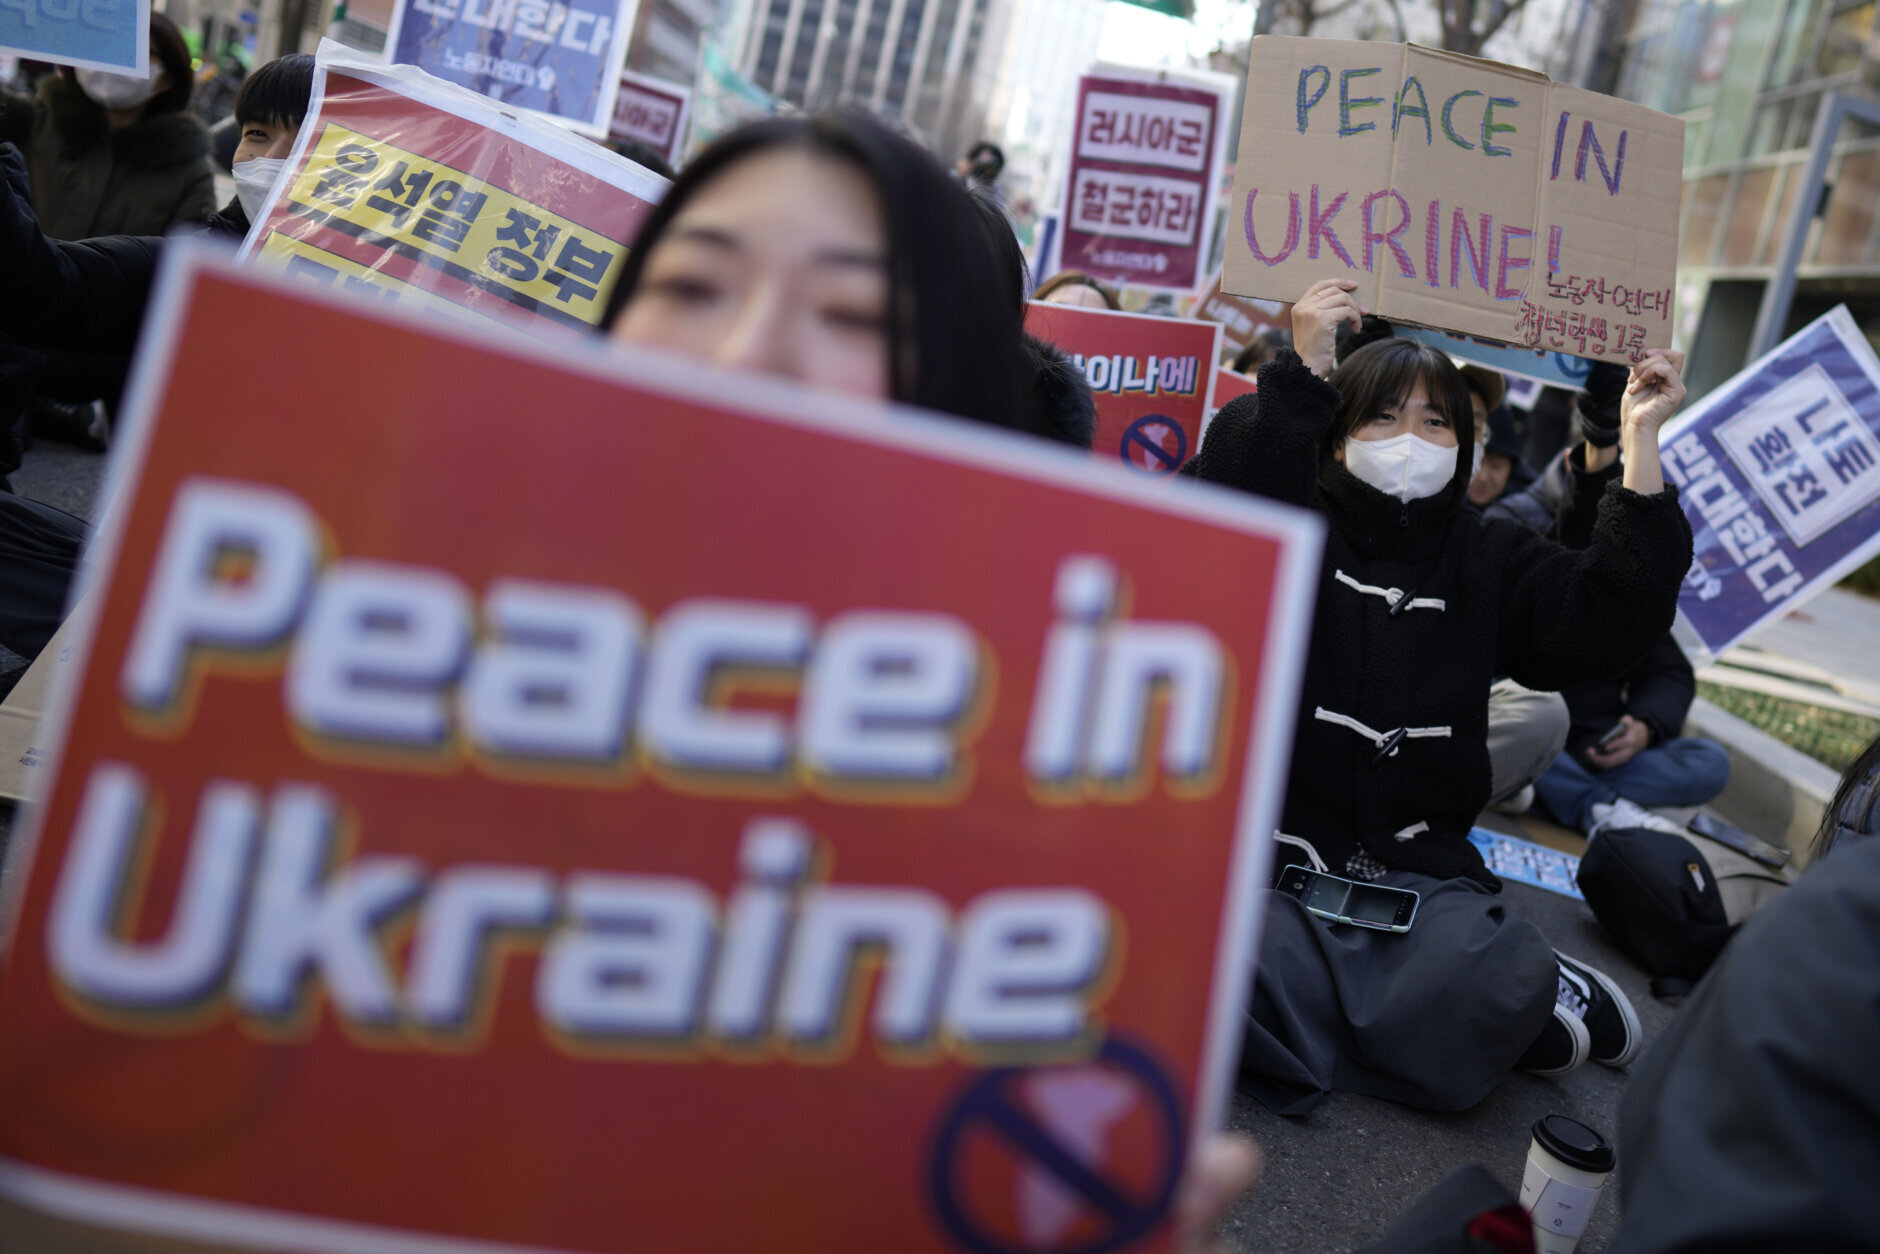 Protesters shout slogans during a rally to mark the one-year anniversary of Russia's invasion of Ukraine, in downtown Seoul, South Korea, Saturday, Feb. 25, 2023. (AP Photo/Lee Jin-man)